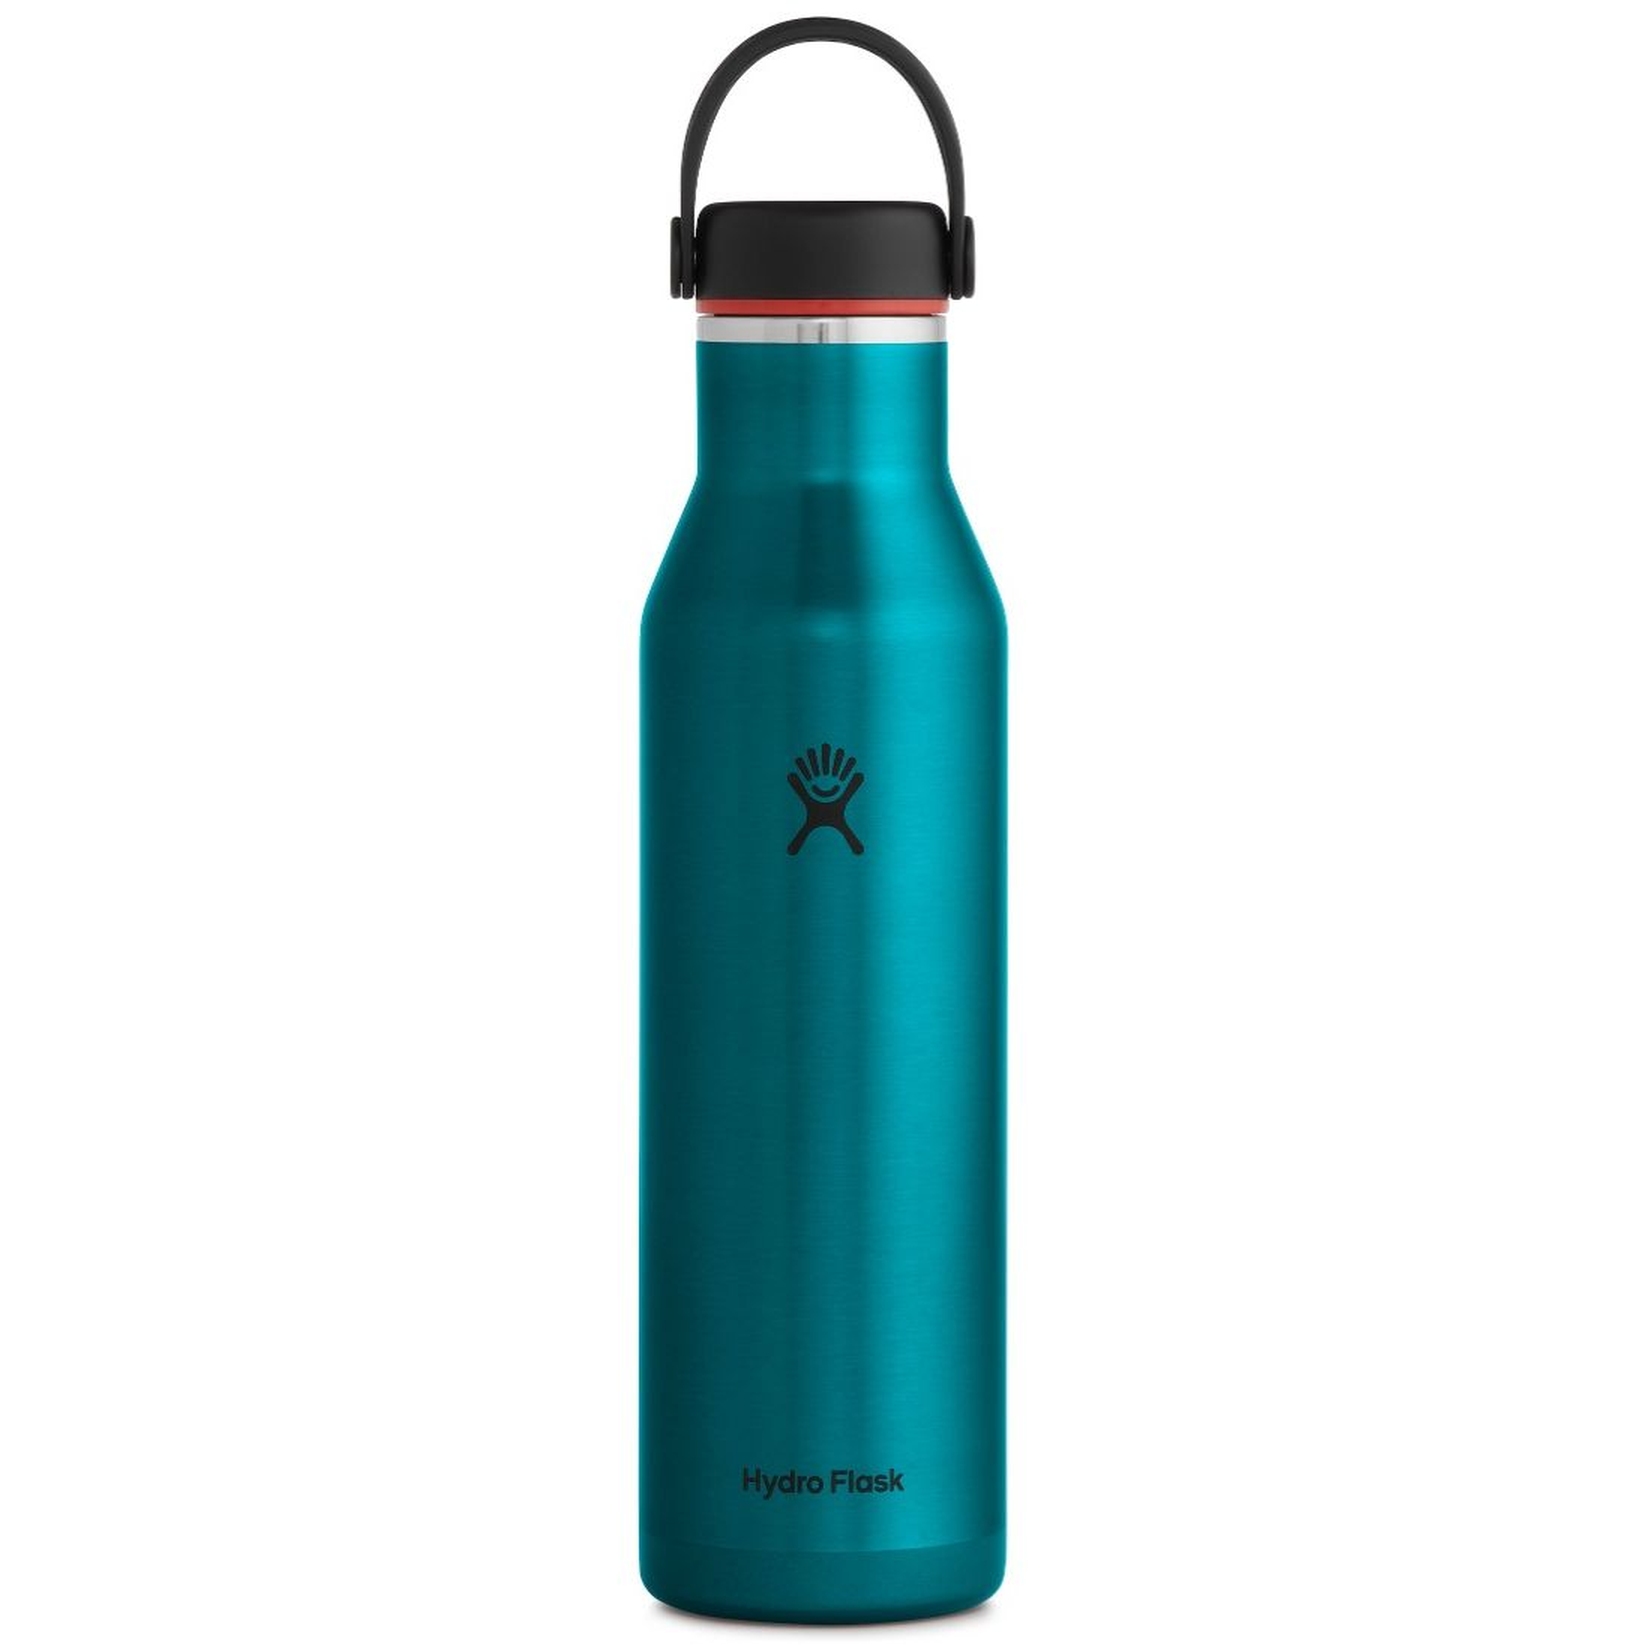 Image of Hydro Flask 21 oz Lightweight Standard Mouth Trail Series - Insulated Bottle - 621 ml - Celestine